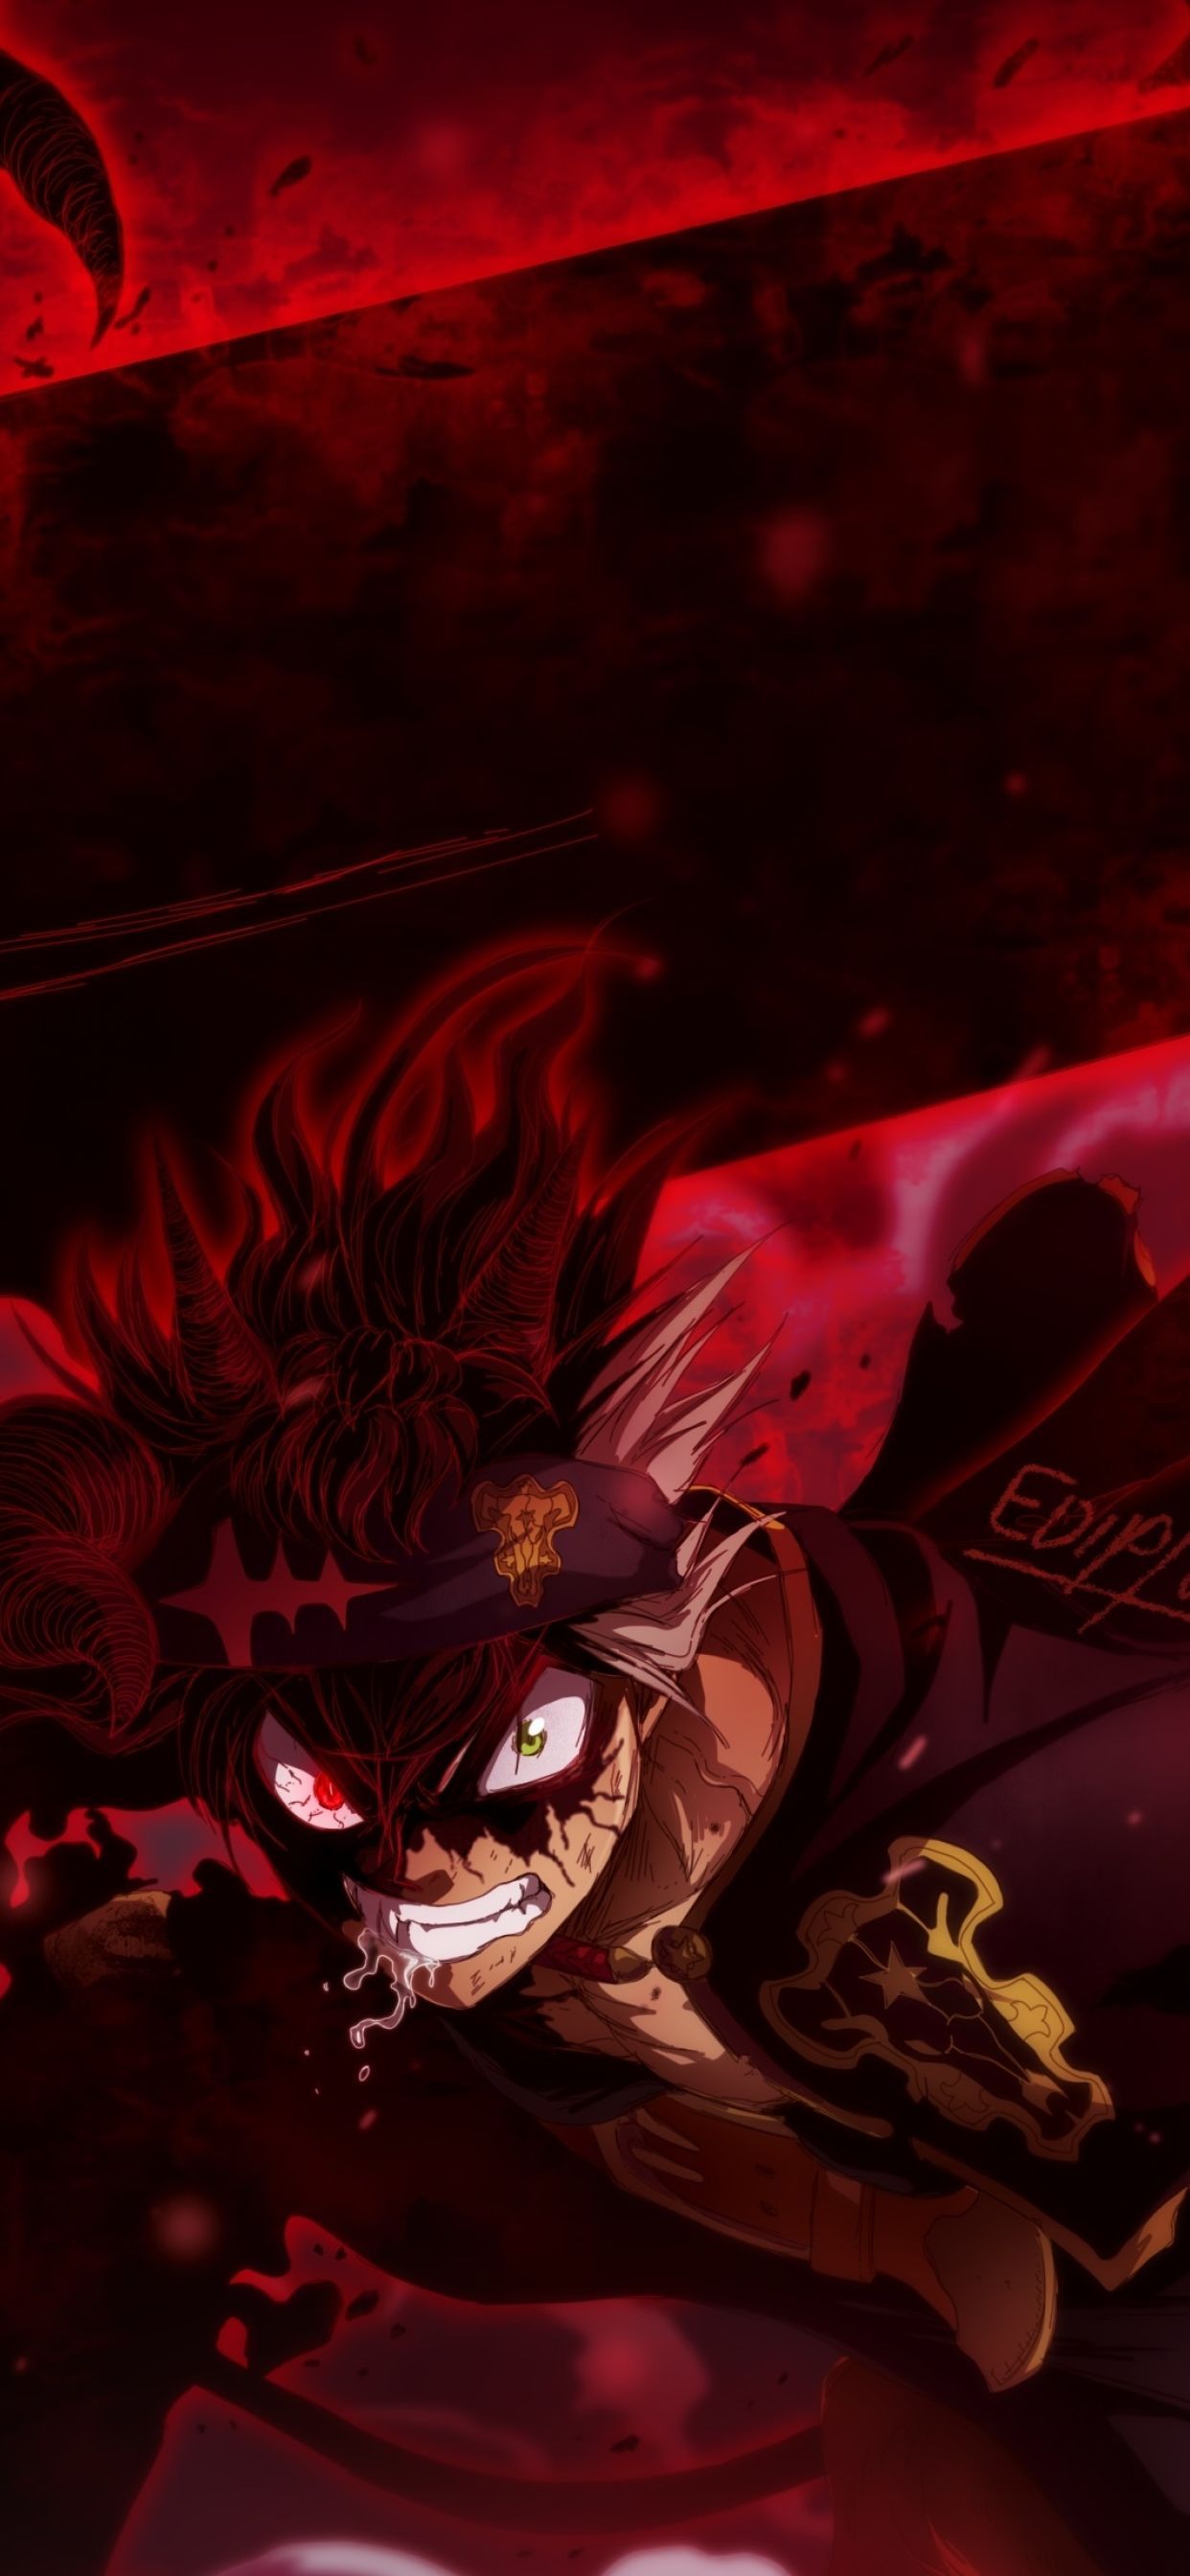 Asta in Black Clover iPhone XS MAX Wallpaper, HD Anime 4K Wallpaper, Image, Photo and Background. Cute black wallpaper, Black clover anime, Black clover manga